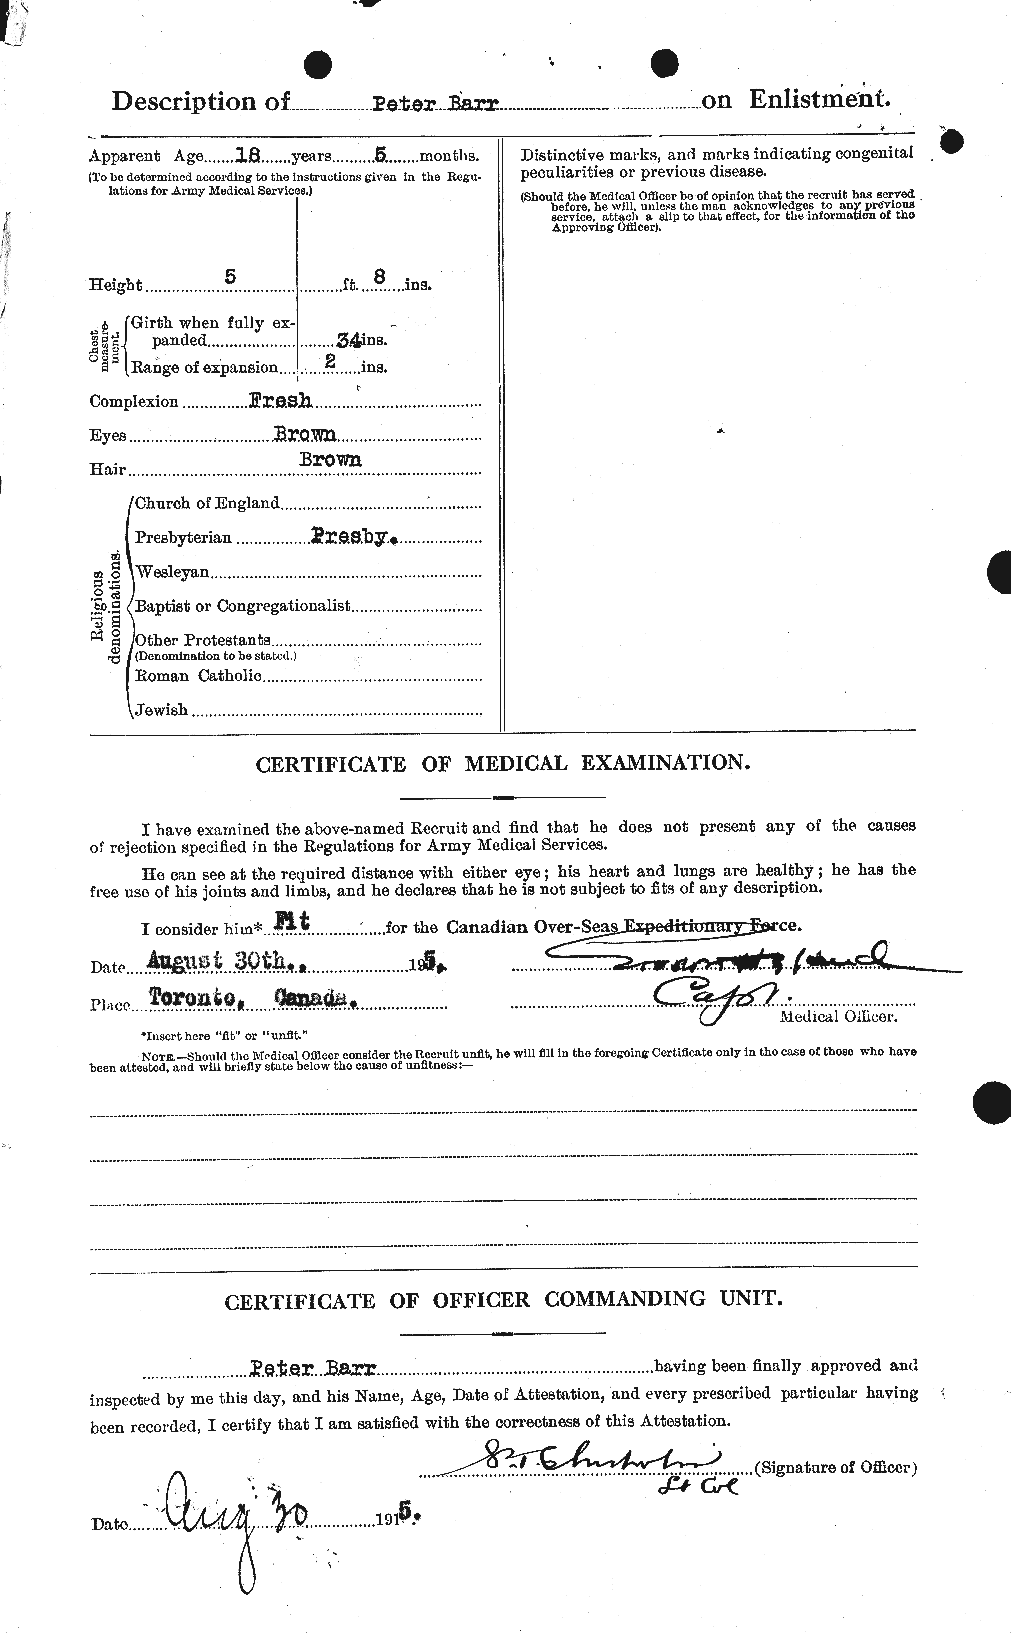 Personnel Records of the First World War - CEF 227892b